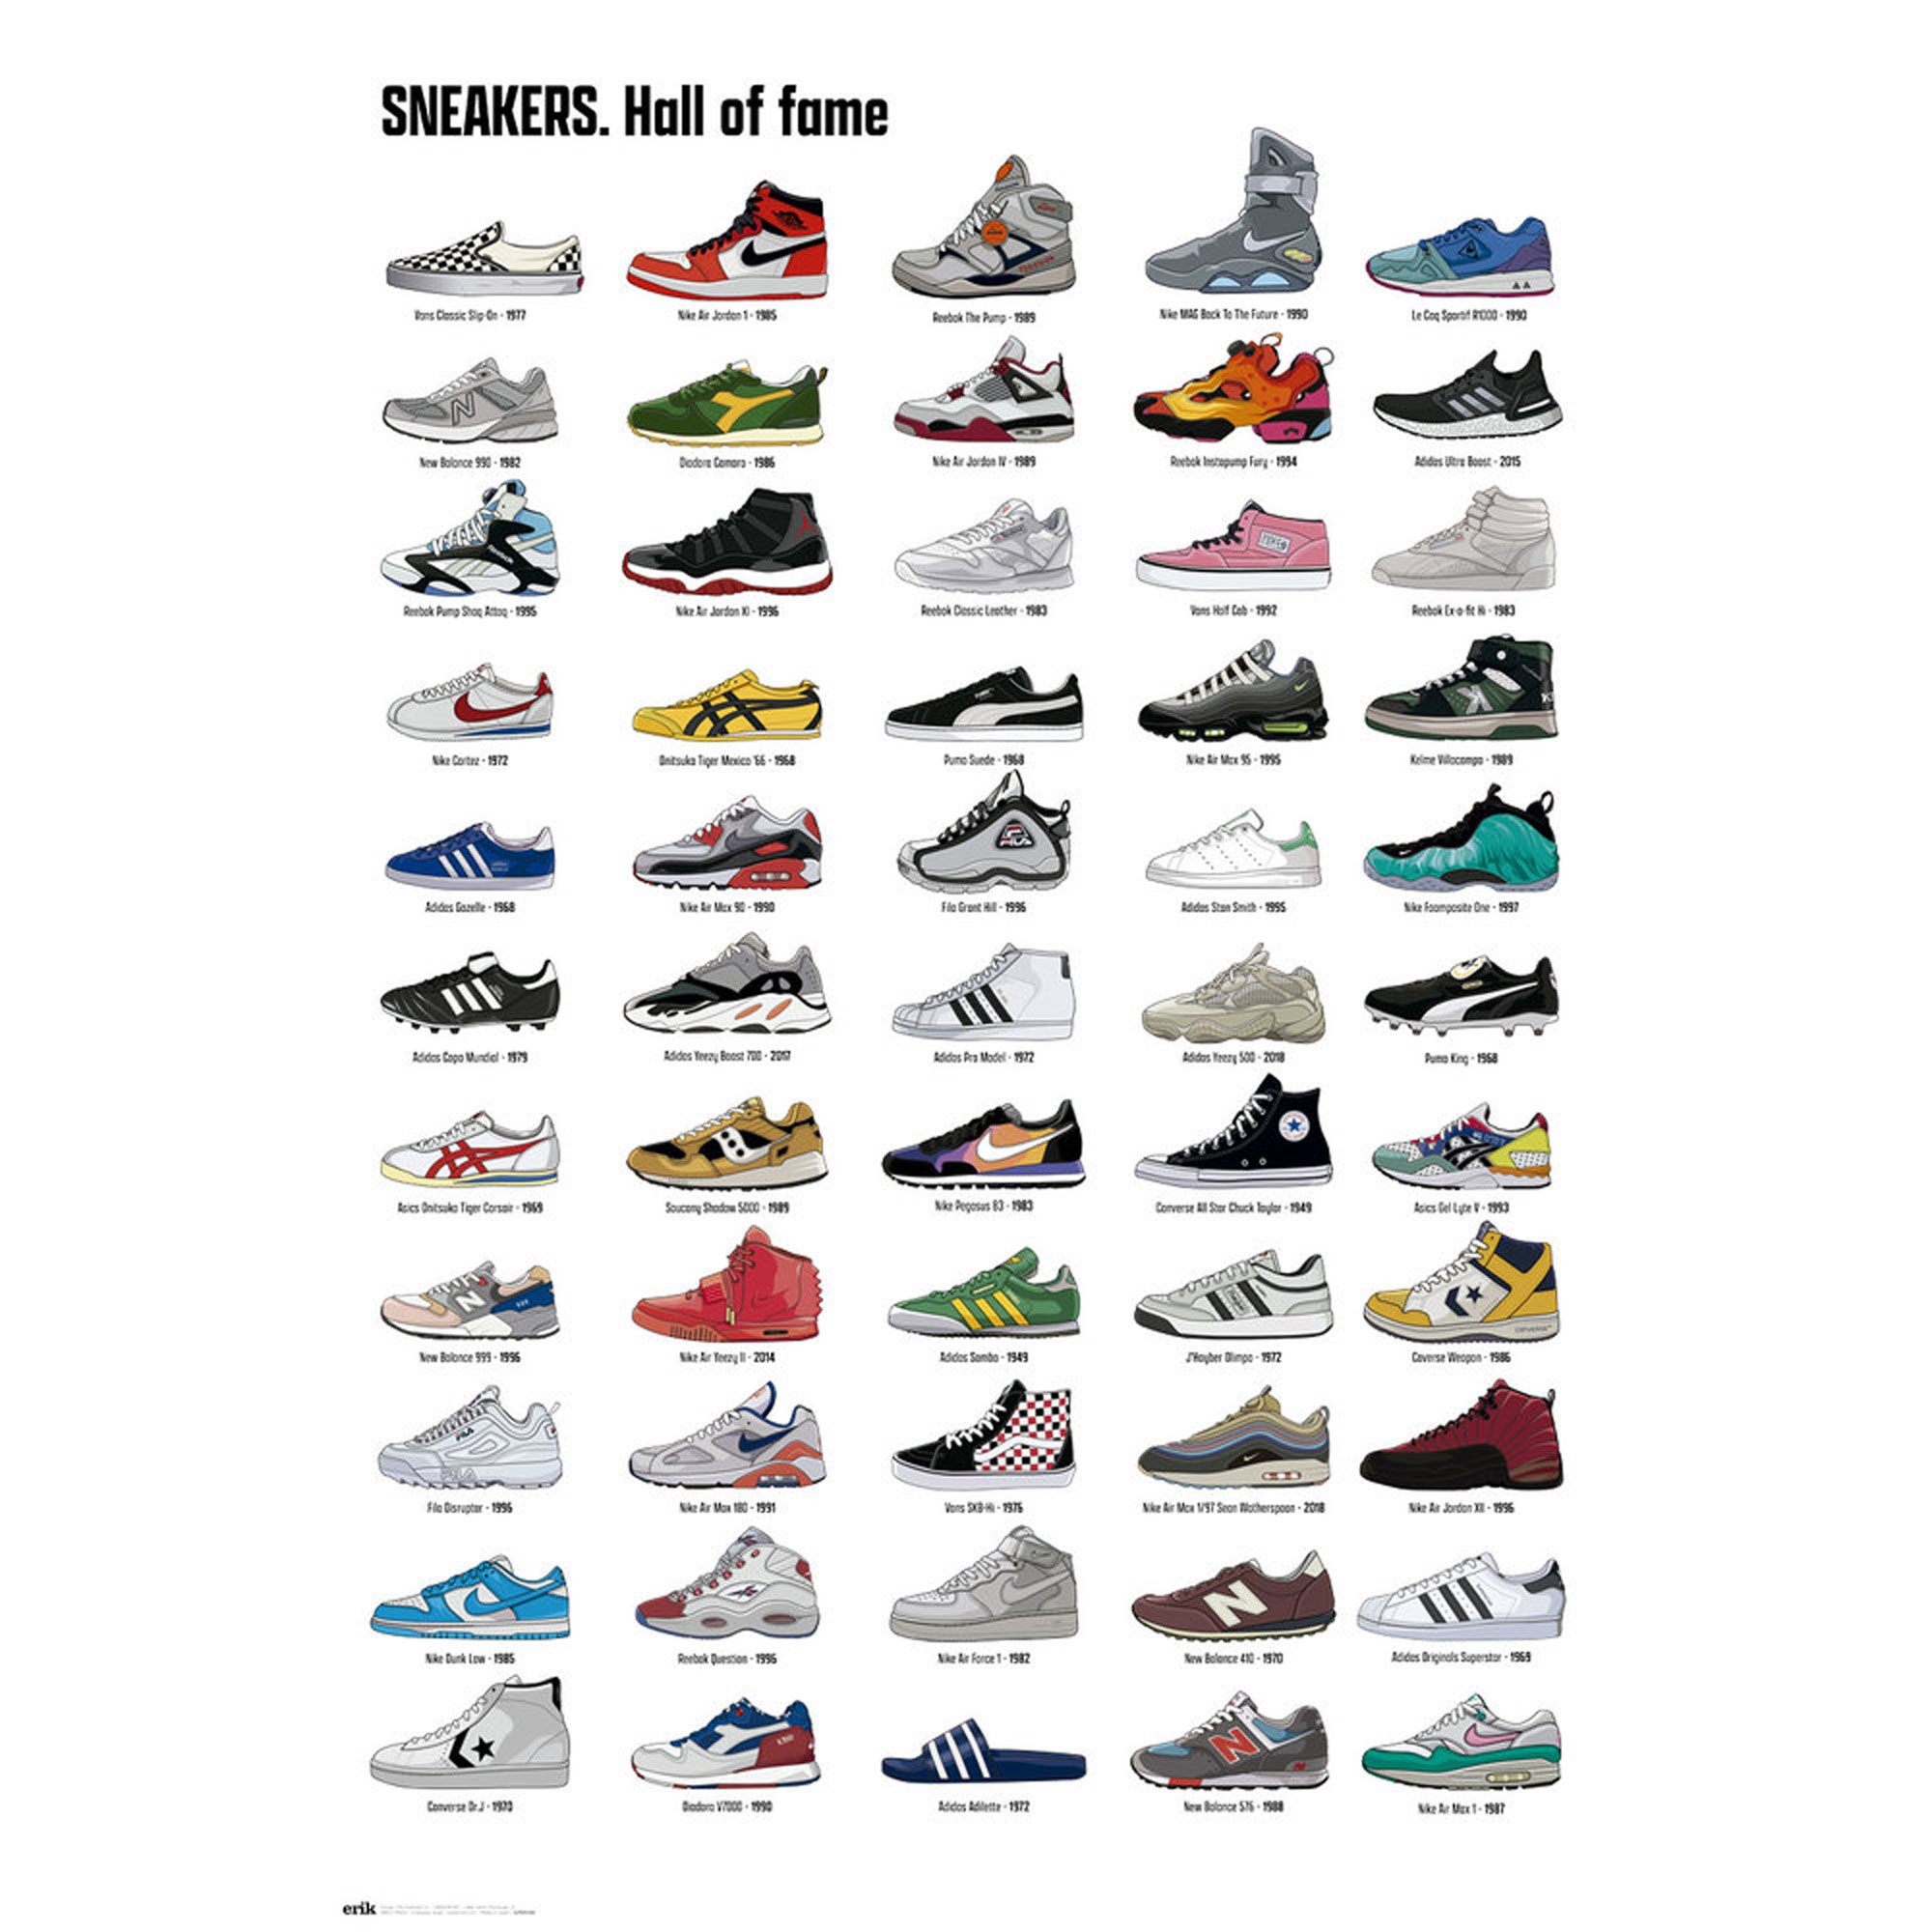 - Fame Hall of Sneakers